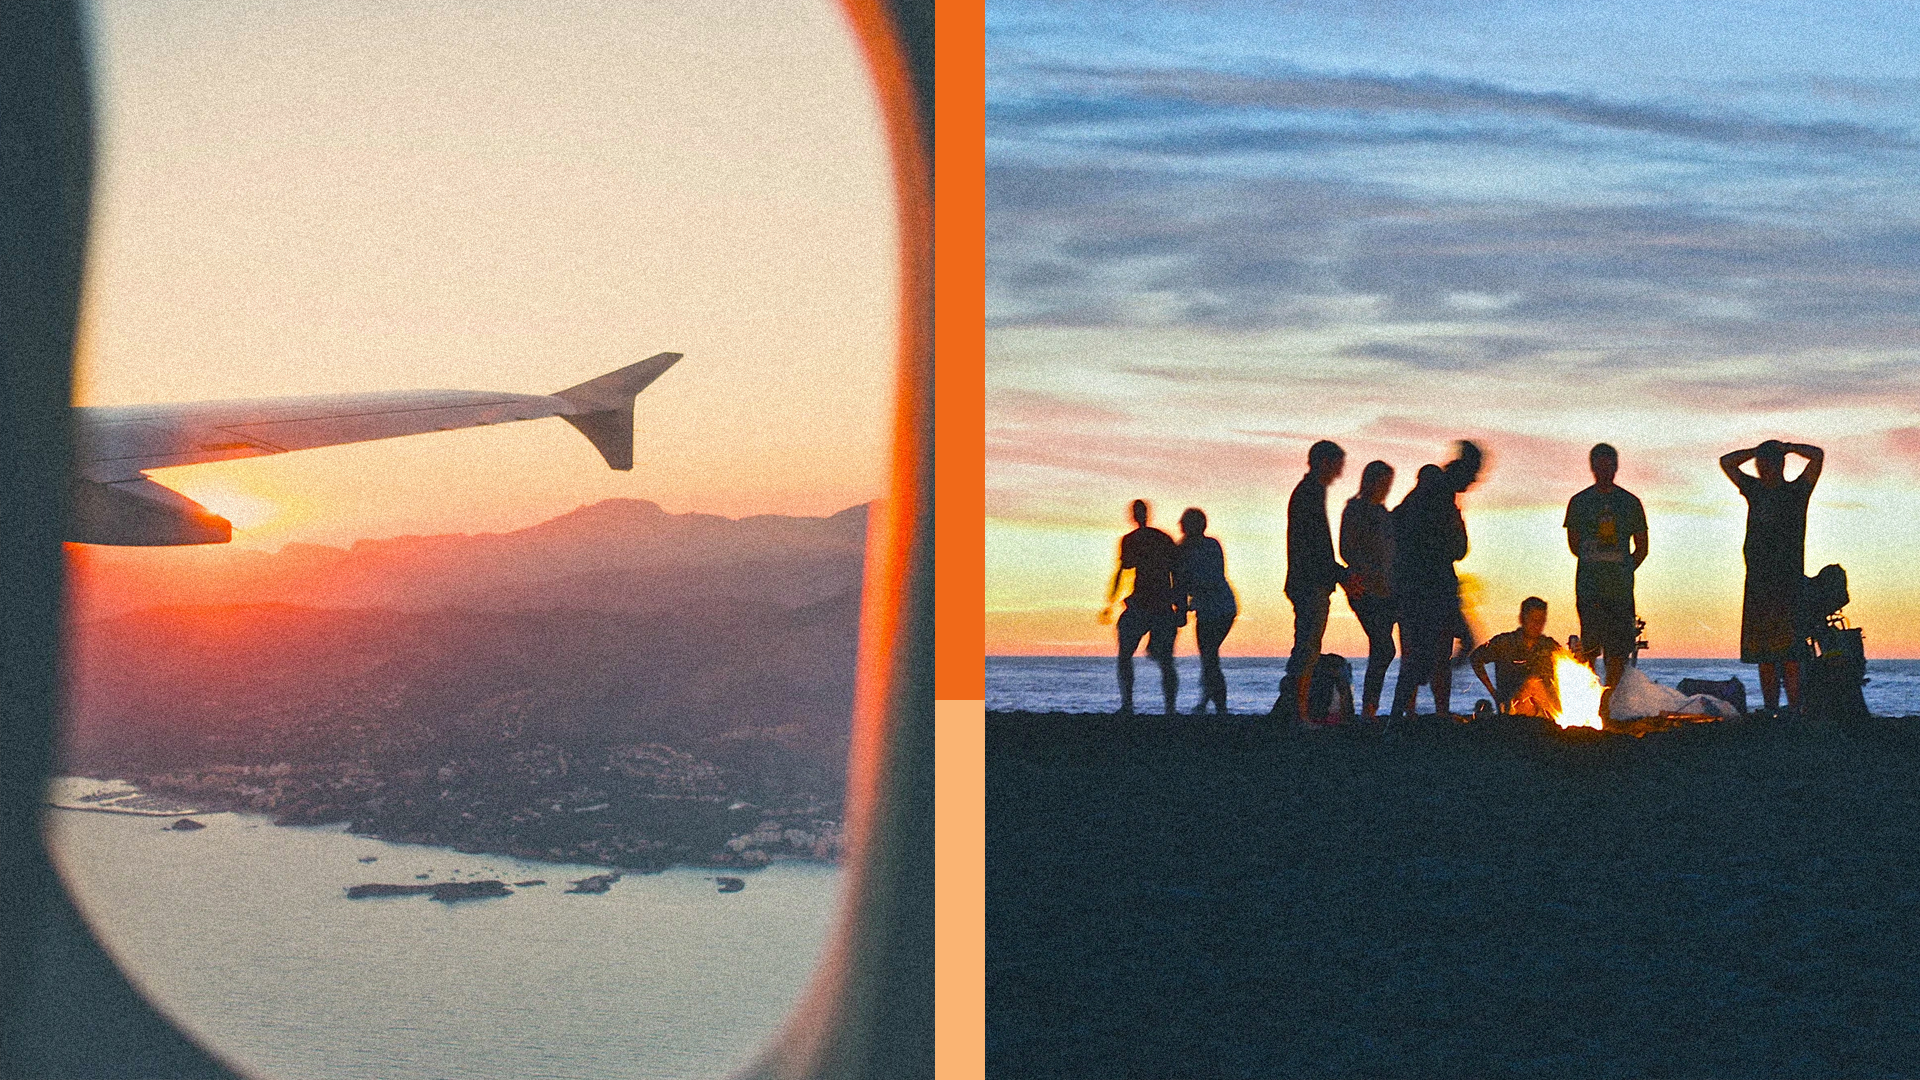 On the left, an airplane wing seen from the inside of the plane. On the right, a group of people gather around a beach bonfire at dusk.